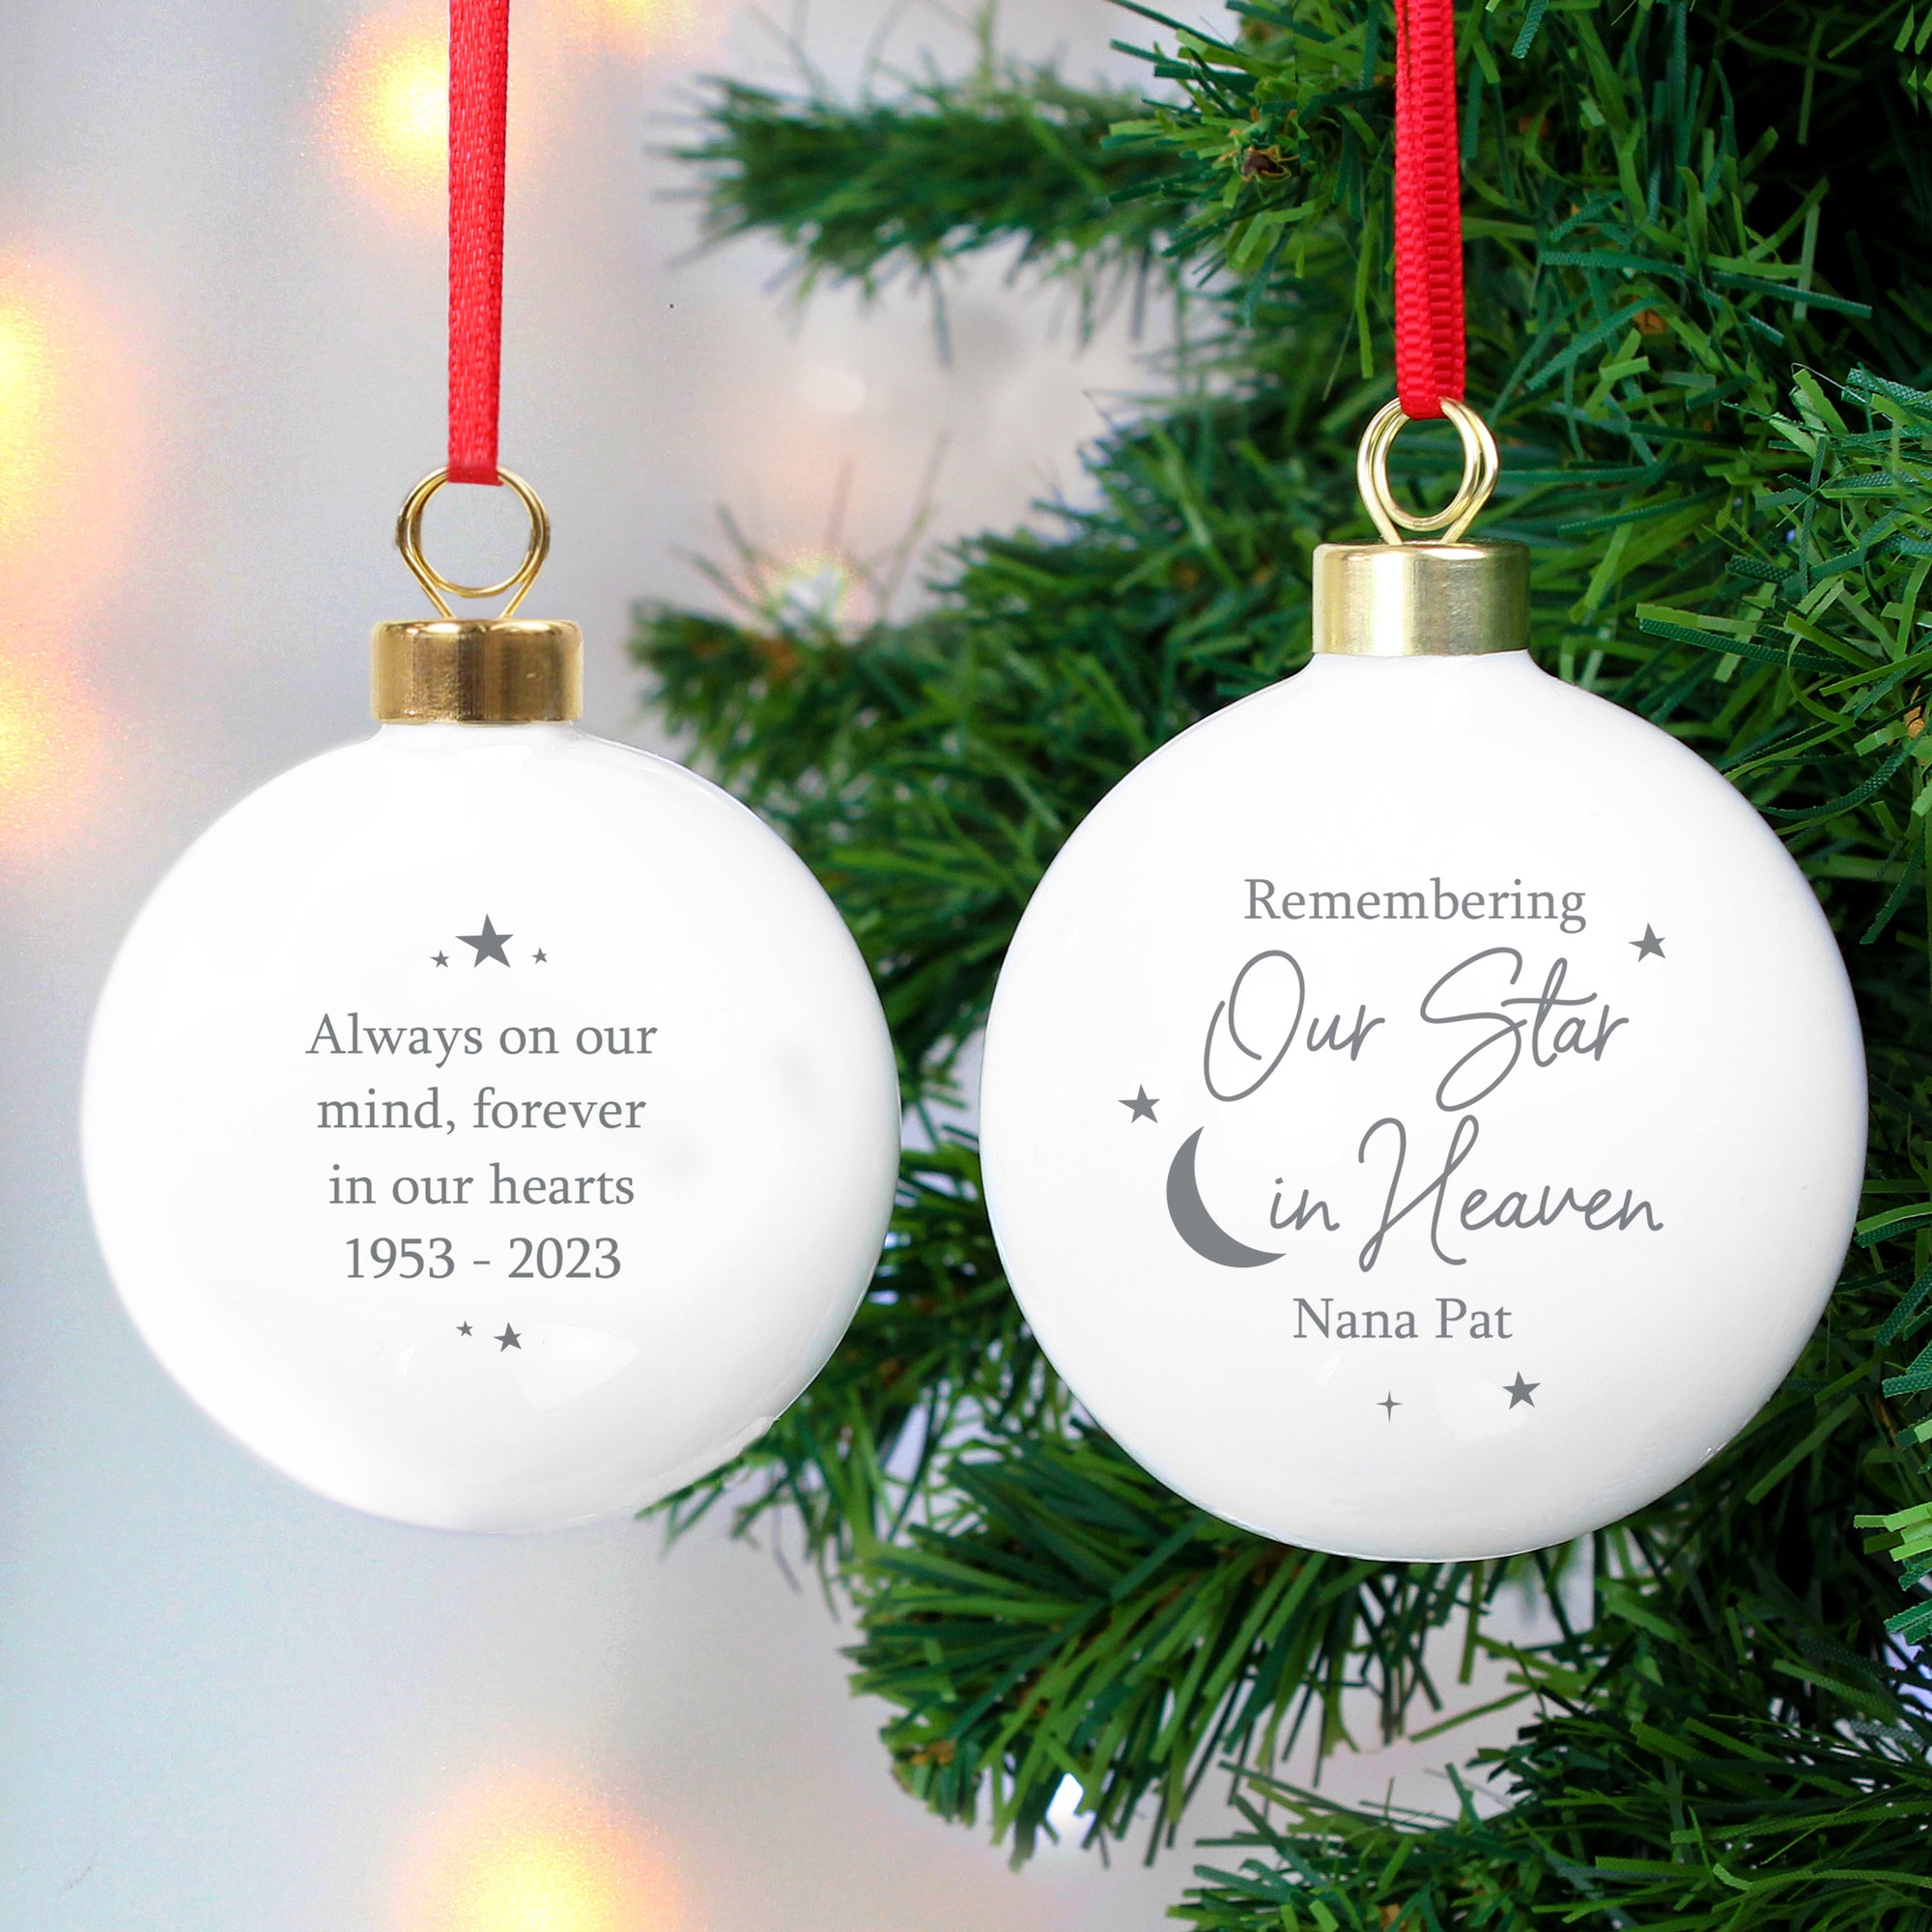 Image of the front and back of a personalised memorial Christmas bauble. The bauble is white and the front features the wording ‘Remembering Our Star in Heaven’ in a great font which is a fixed part of the design and you can add a name of your choice underneath. You can add your own message to the back of the bauble which will be printed in a grey font with some stars around the writing.